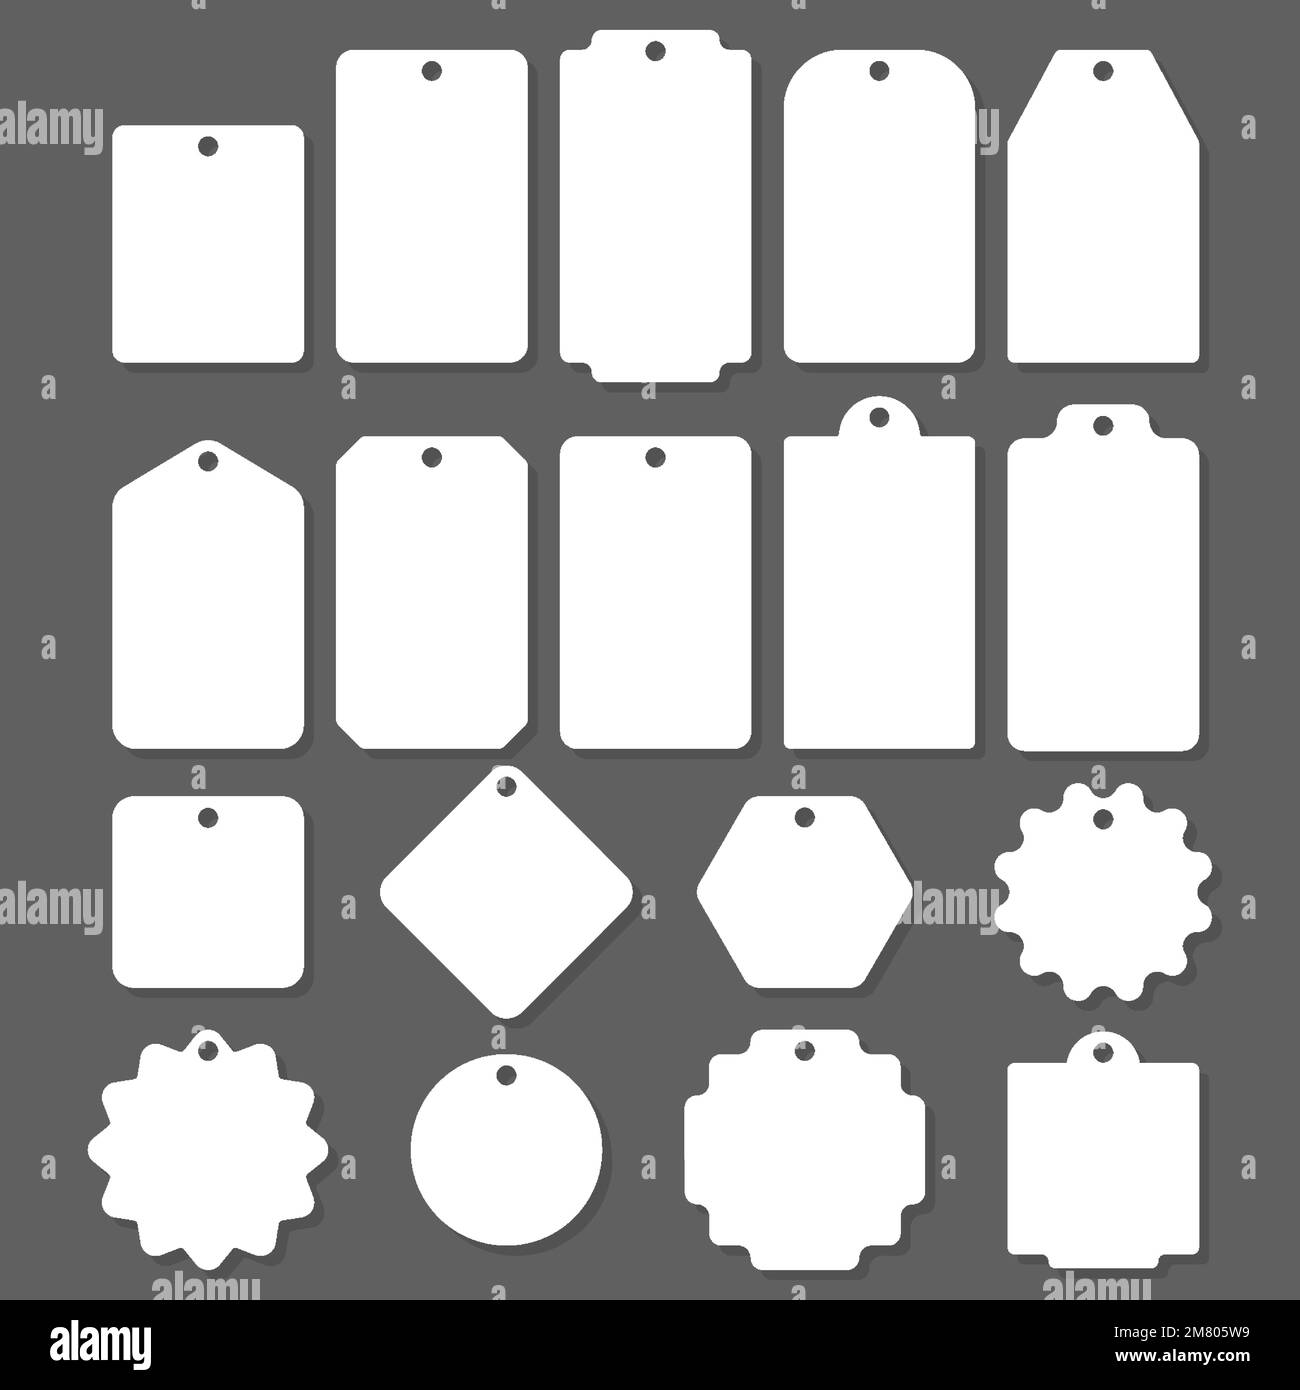 blank-white-paper-price-tags-or-gift-tags-in-different-shapes-blank